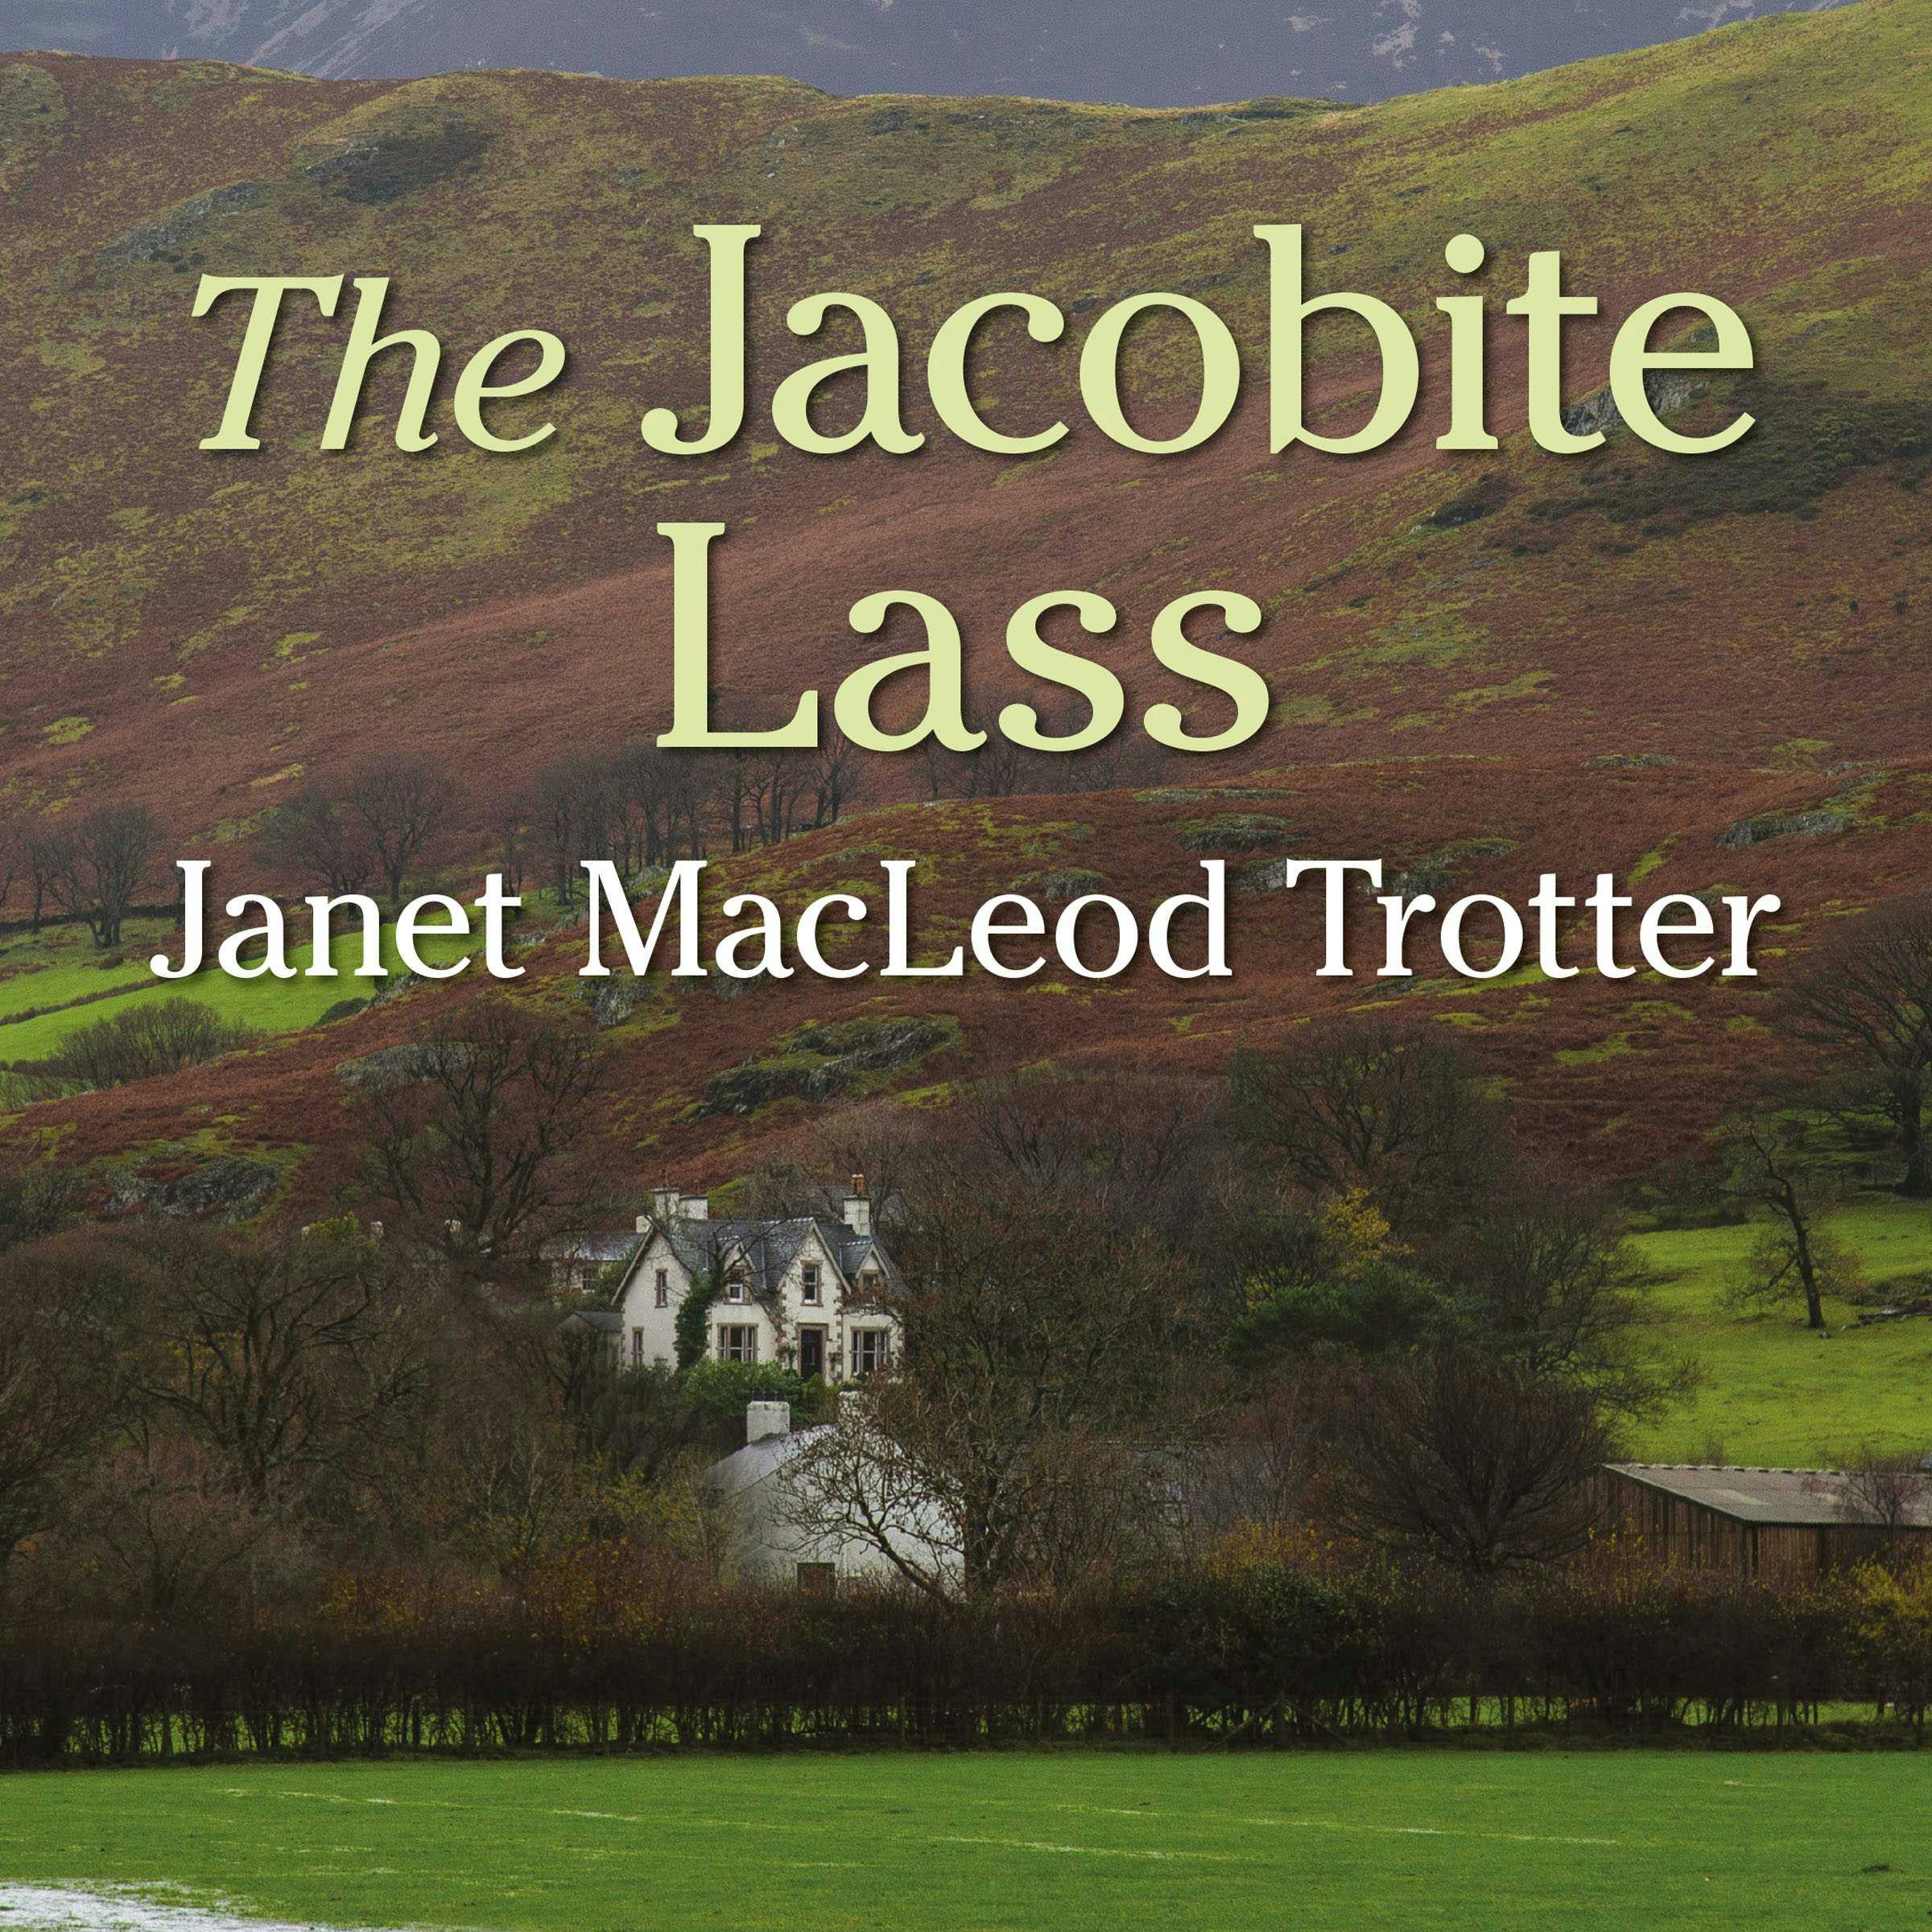 The Jacobite Lass - Janet MacLeod Trotter